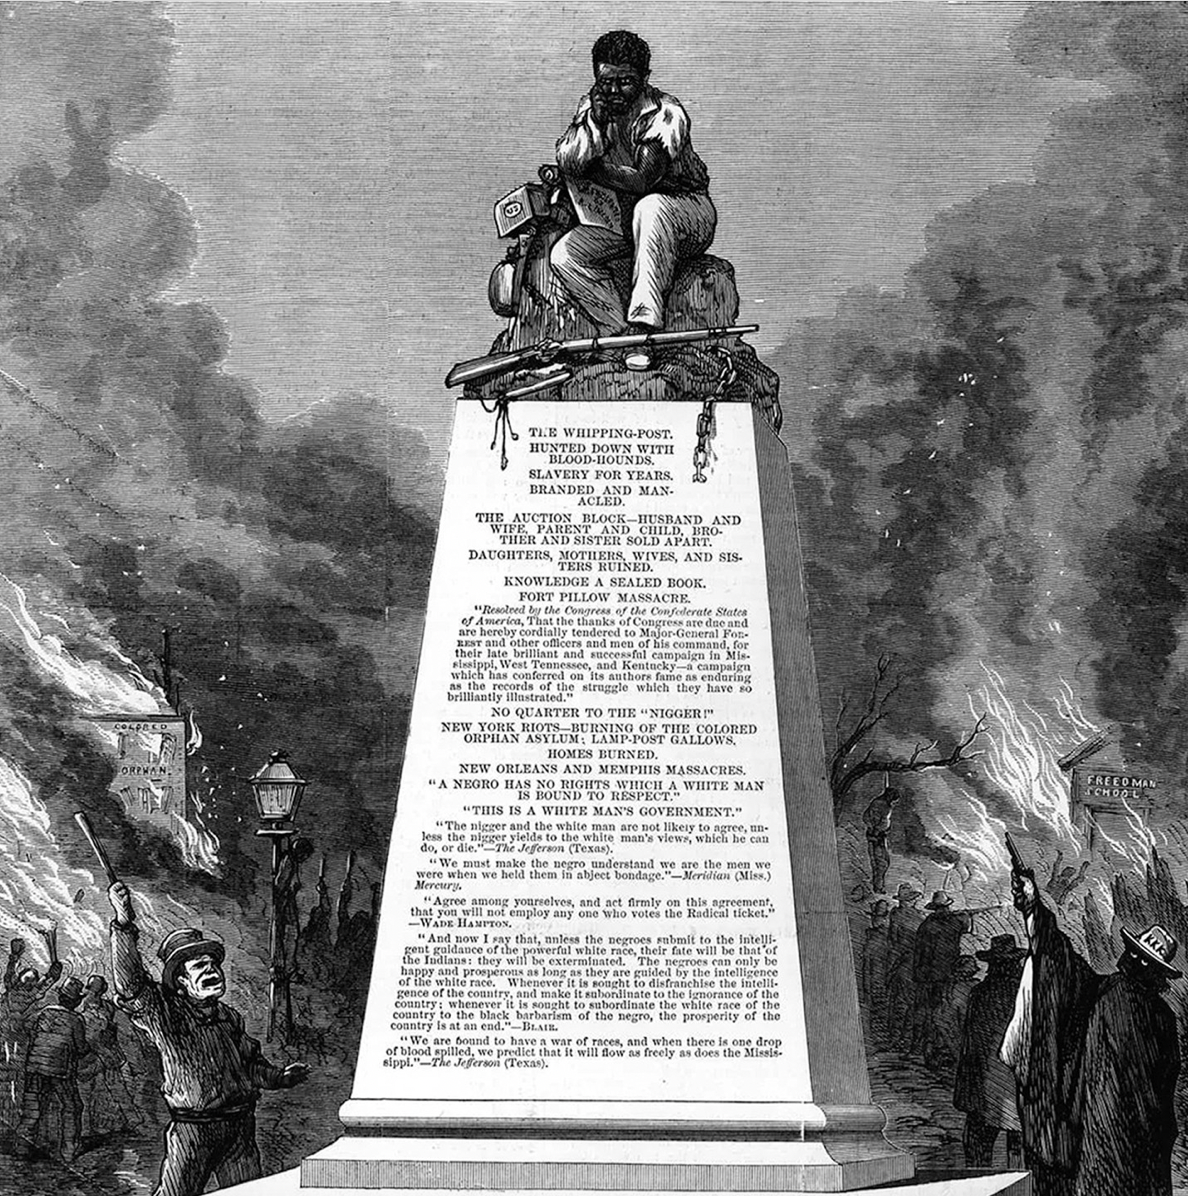 Thomas Nast's political cartoon, The Monument to Patience, depicts the horrors enacted on enslaved African Americans. 